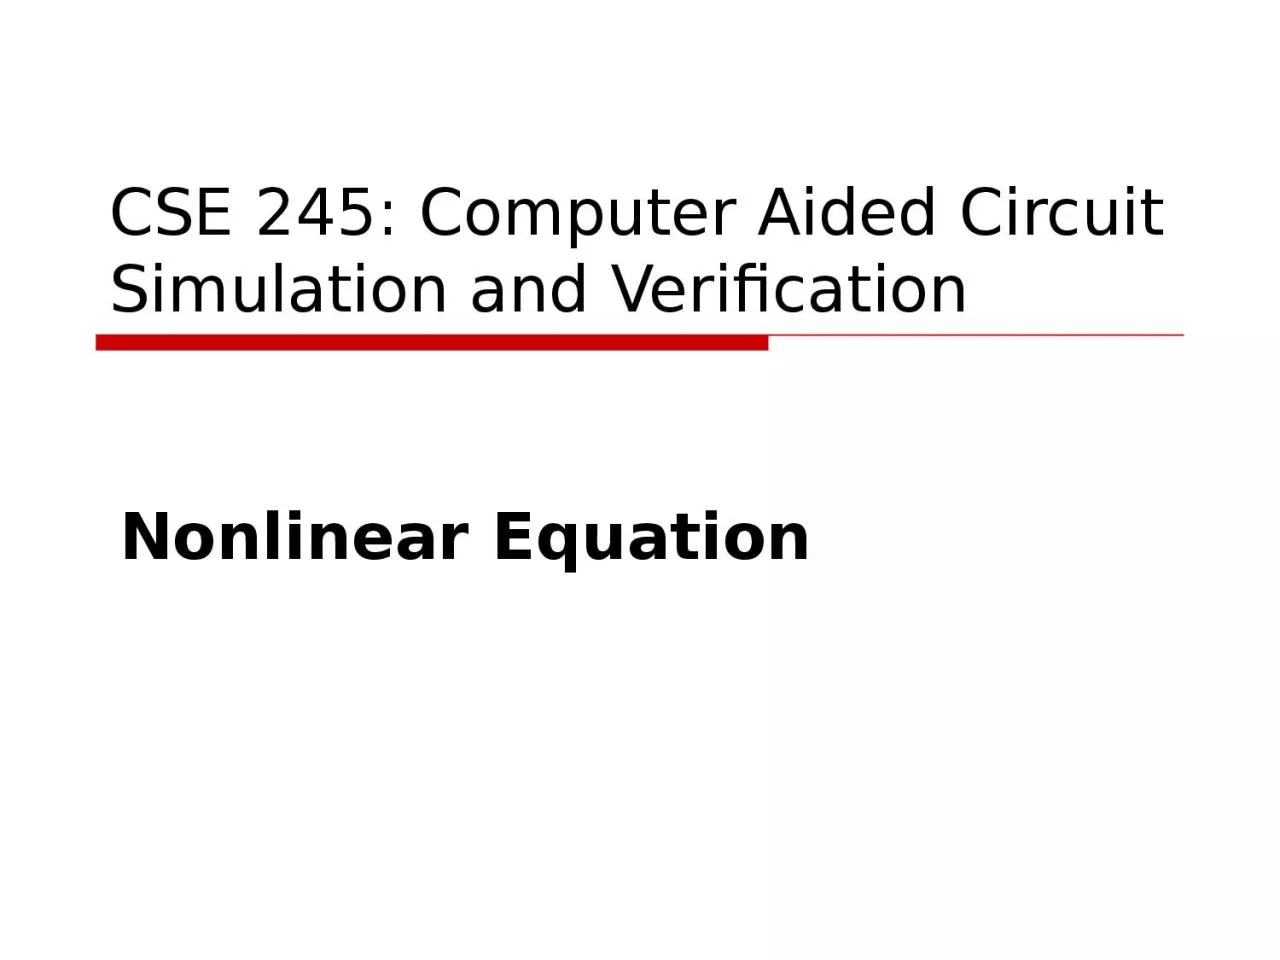 CSE 245: Computer Aided Circuit Simulation and Verification